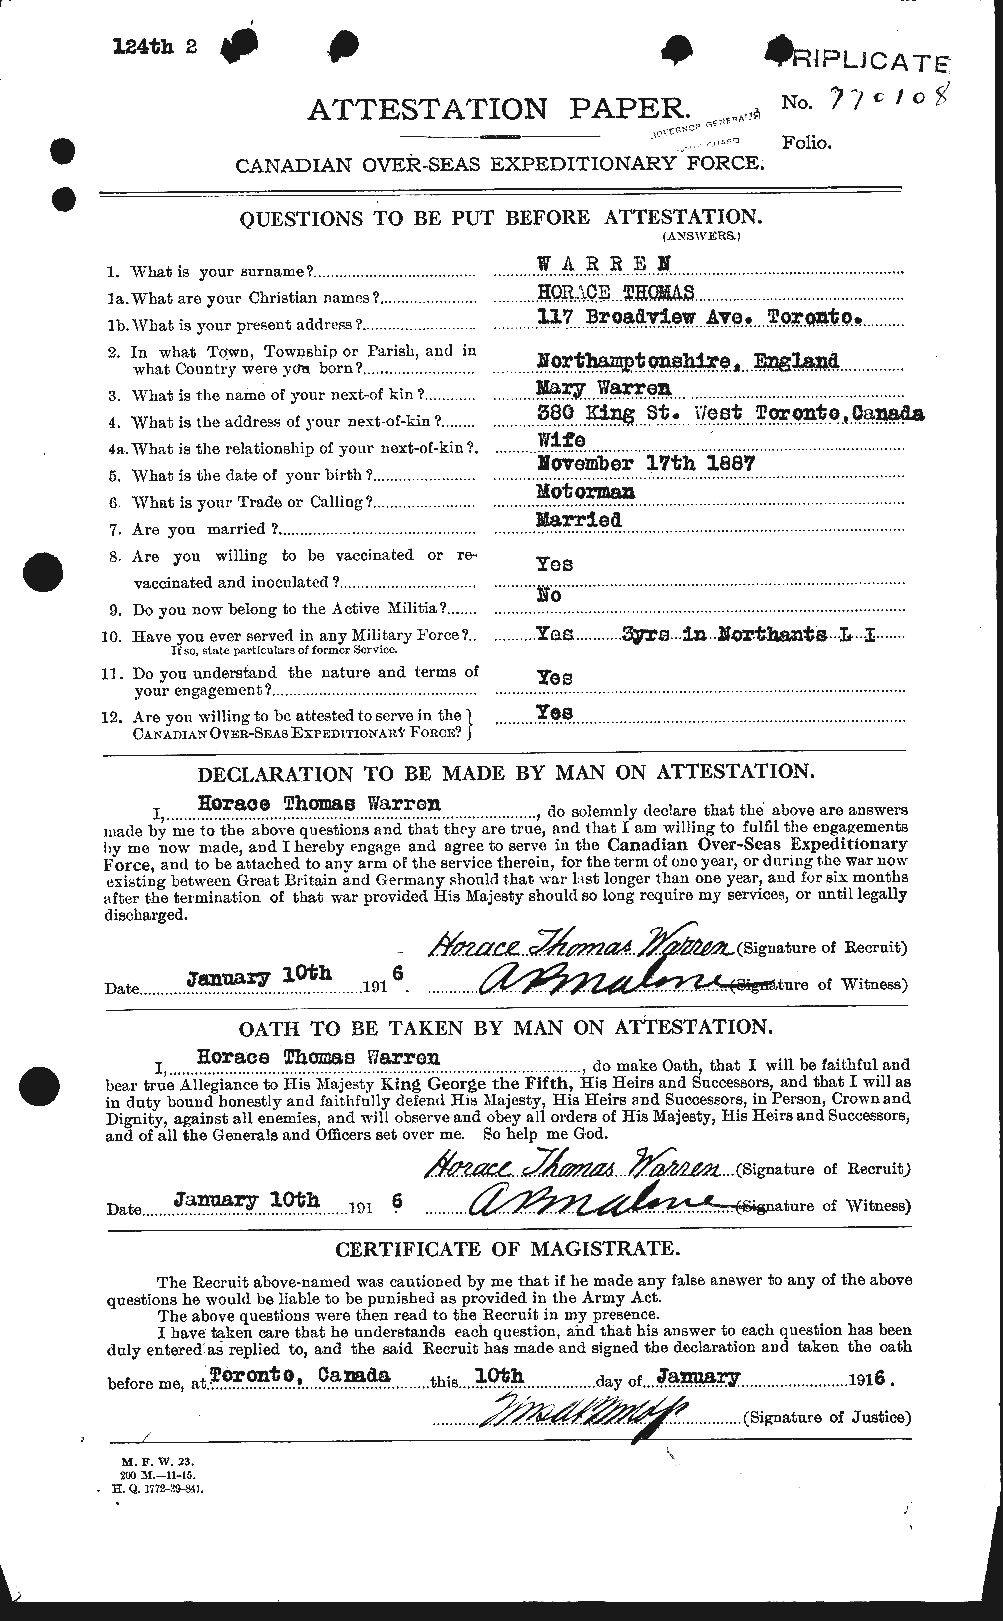 Personnel Records of the First World War - CEF 658506a